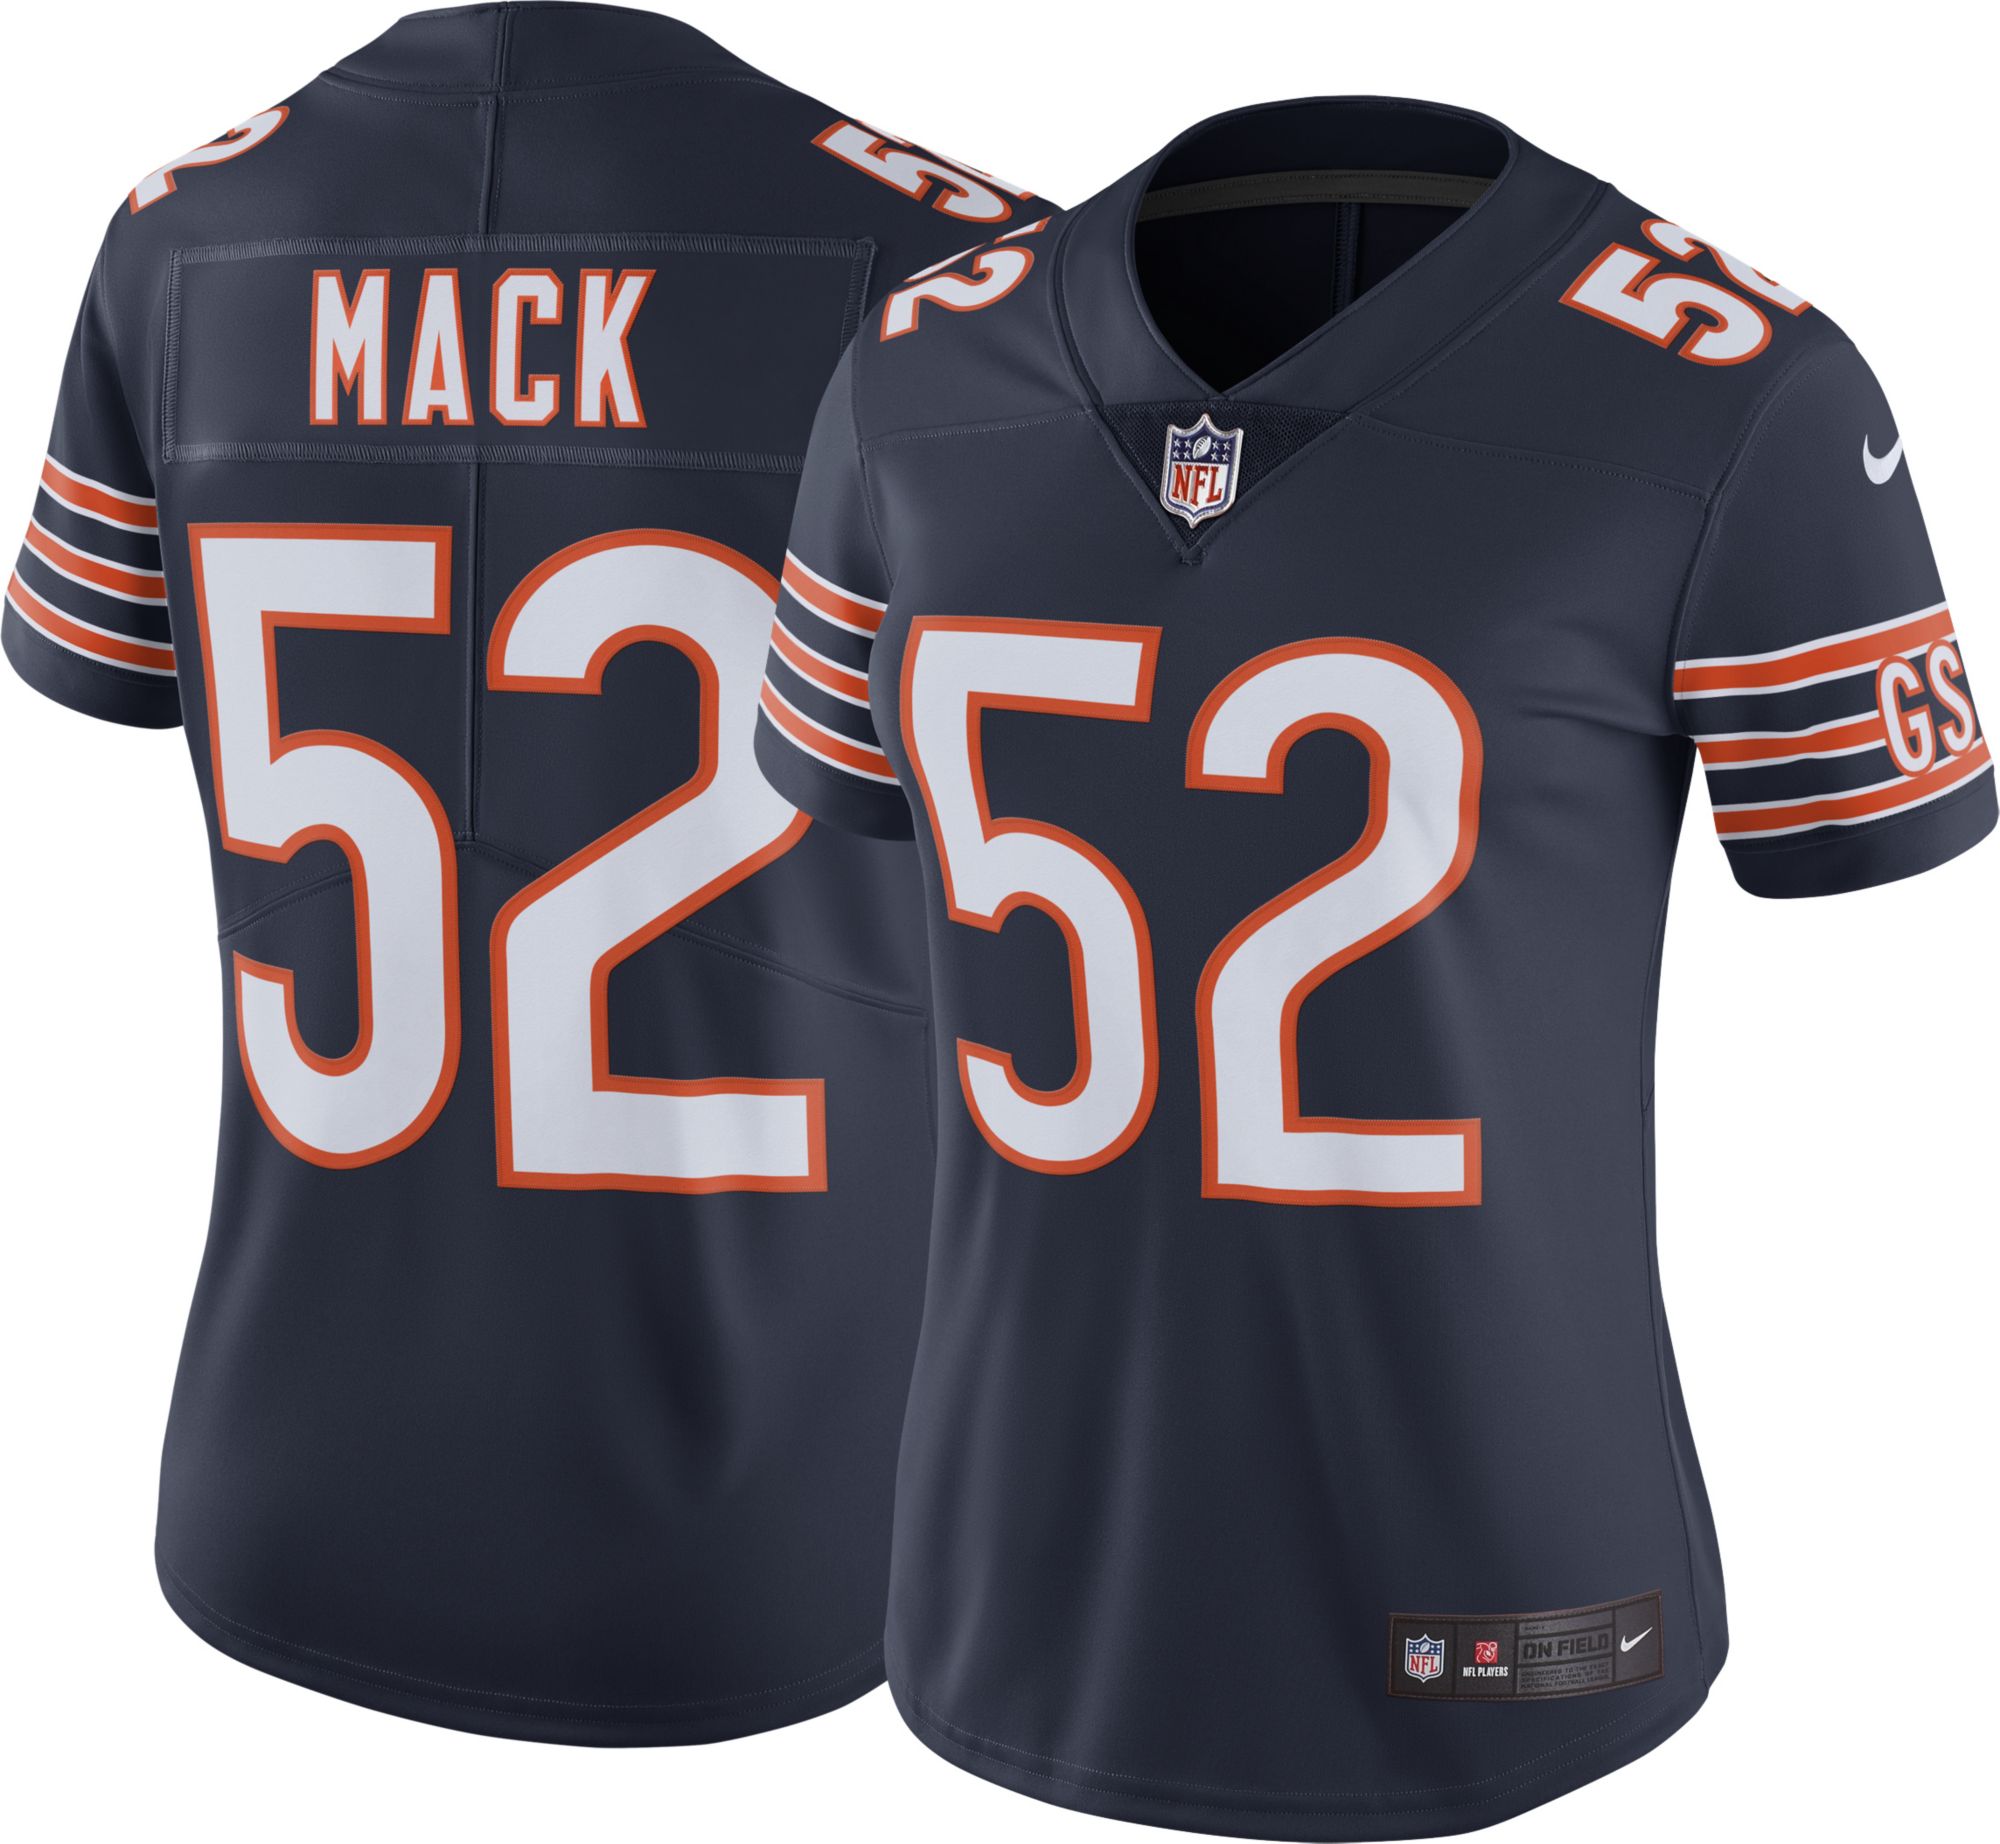 Chicago Bears Jerseys Curbside Pickup Available At Dick S